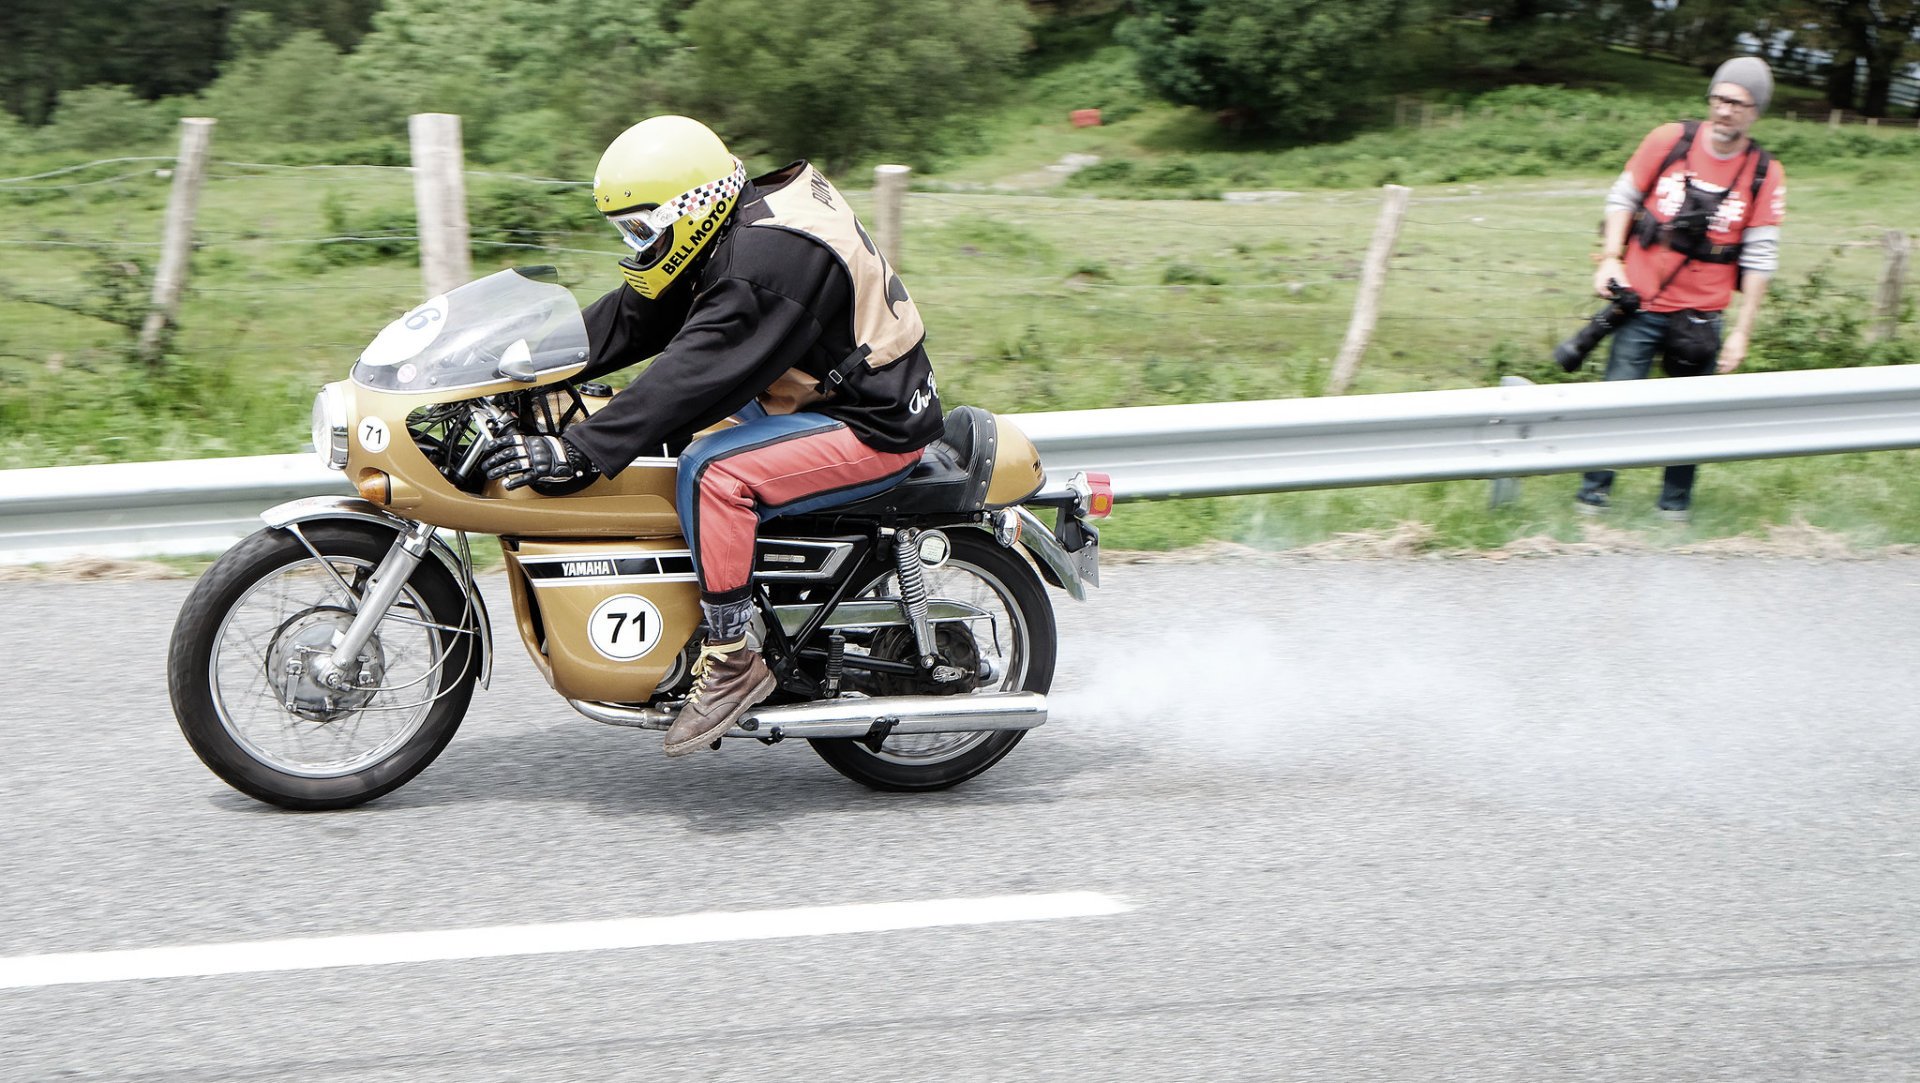 Wheels and Waves in Biarritz